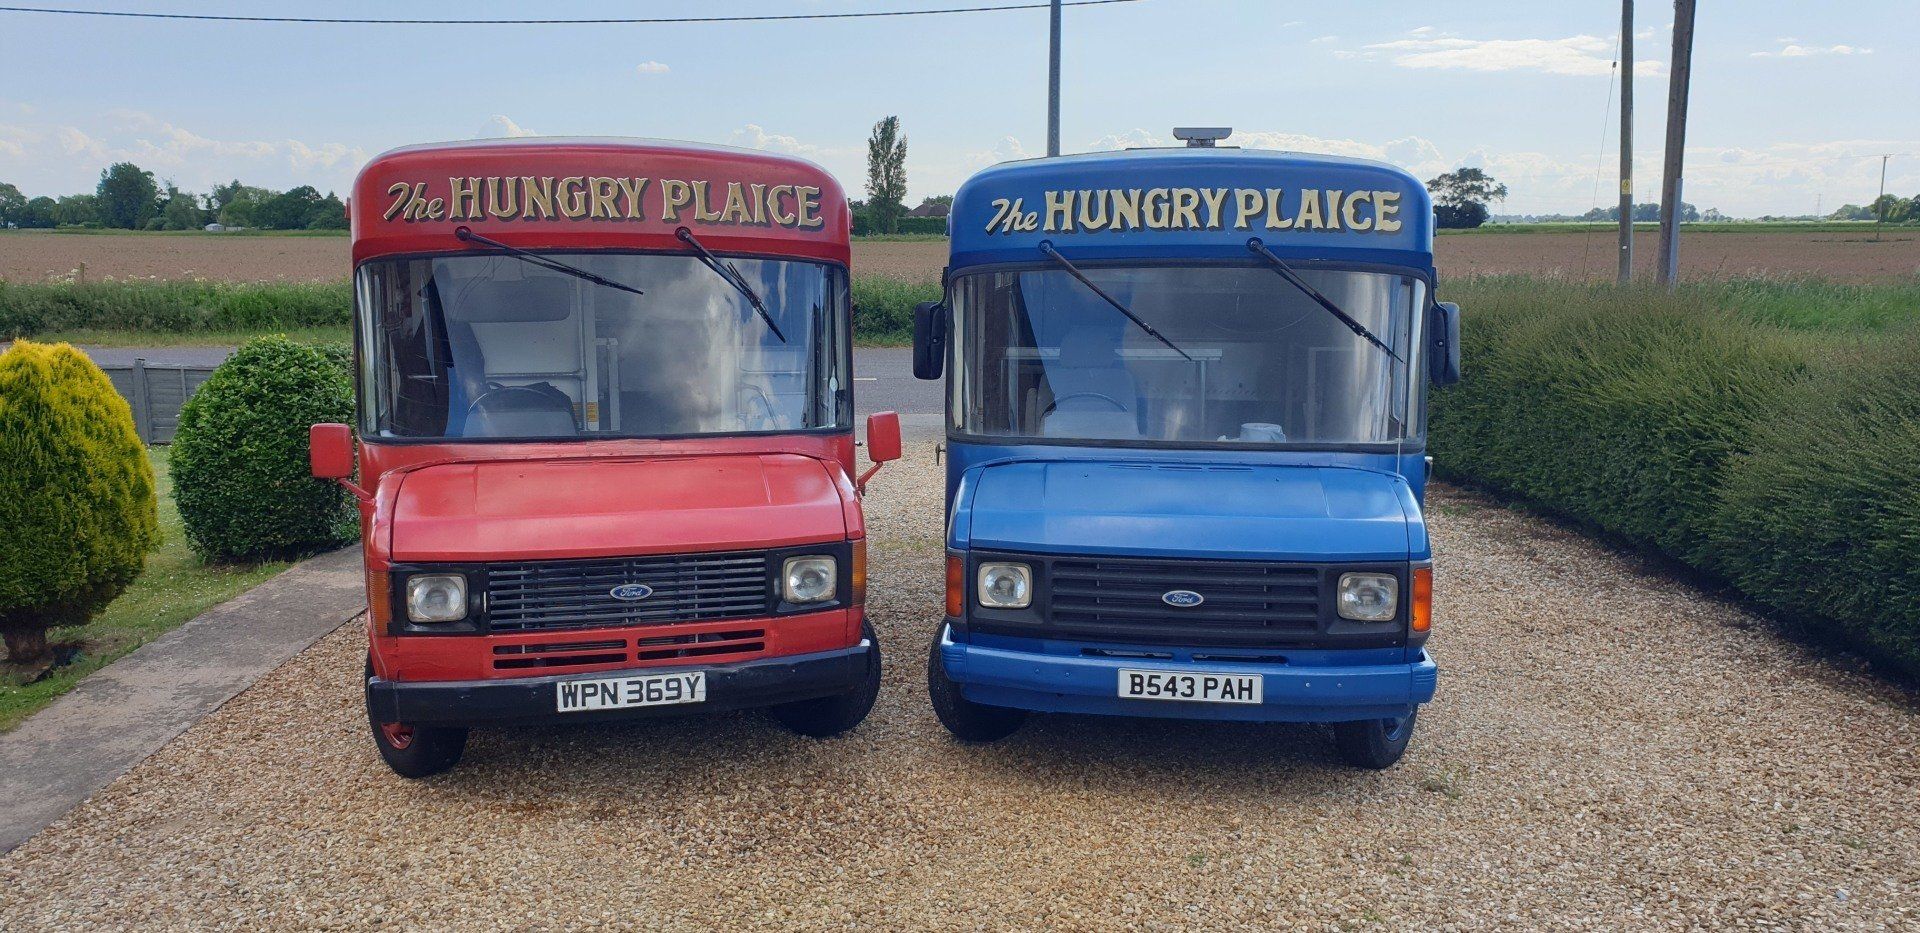 Go Back To The 80s With Our Fish And Chip Van Hire - The Hungry Plaice